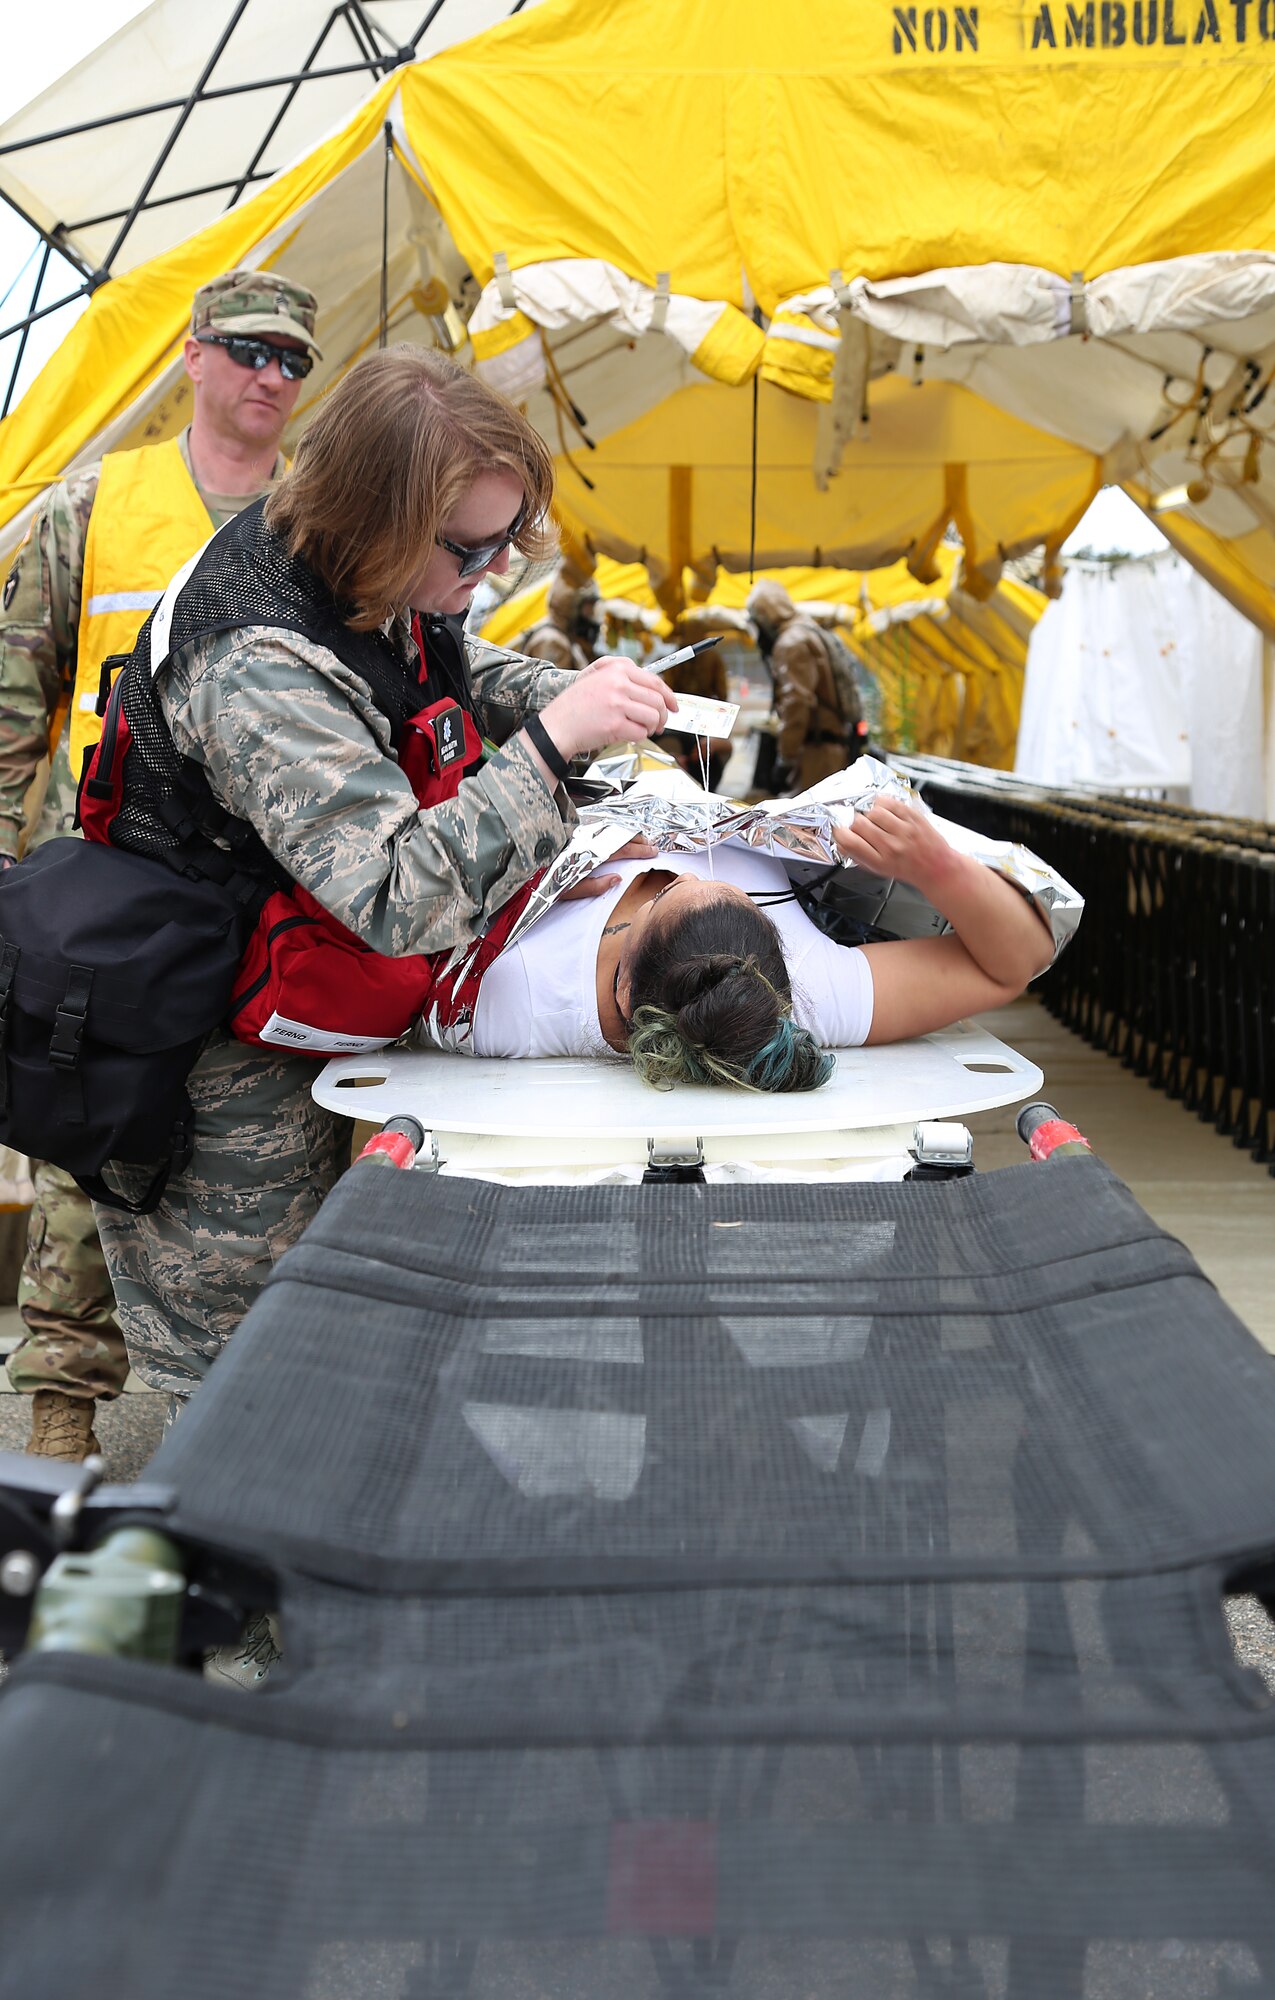 Capt. Megan C. Martin, a nurse assigned to the 157th Medical Group, N.H. Air National Guard, assesses a simulated casualty during a deployment readiness exercise on April 11, 2018 at Joint Base Cape Cod, Mass. Martin is a member of the New England CBRNE Enhanced Response Force Package team. (N.H. Air National Guard photo by Staff Sgt. Kayla White)